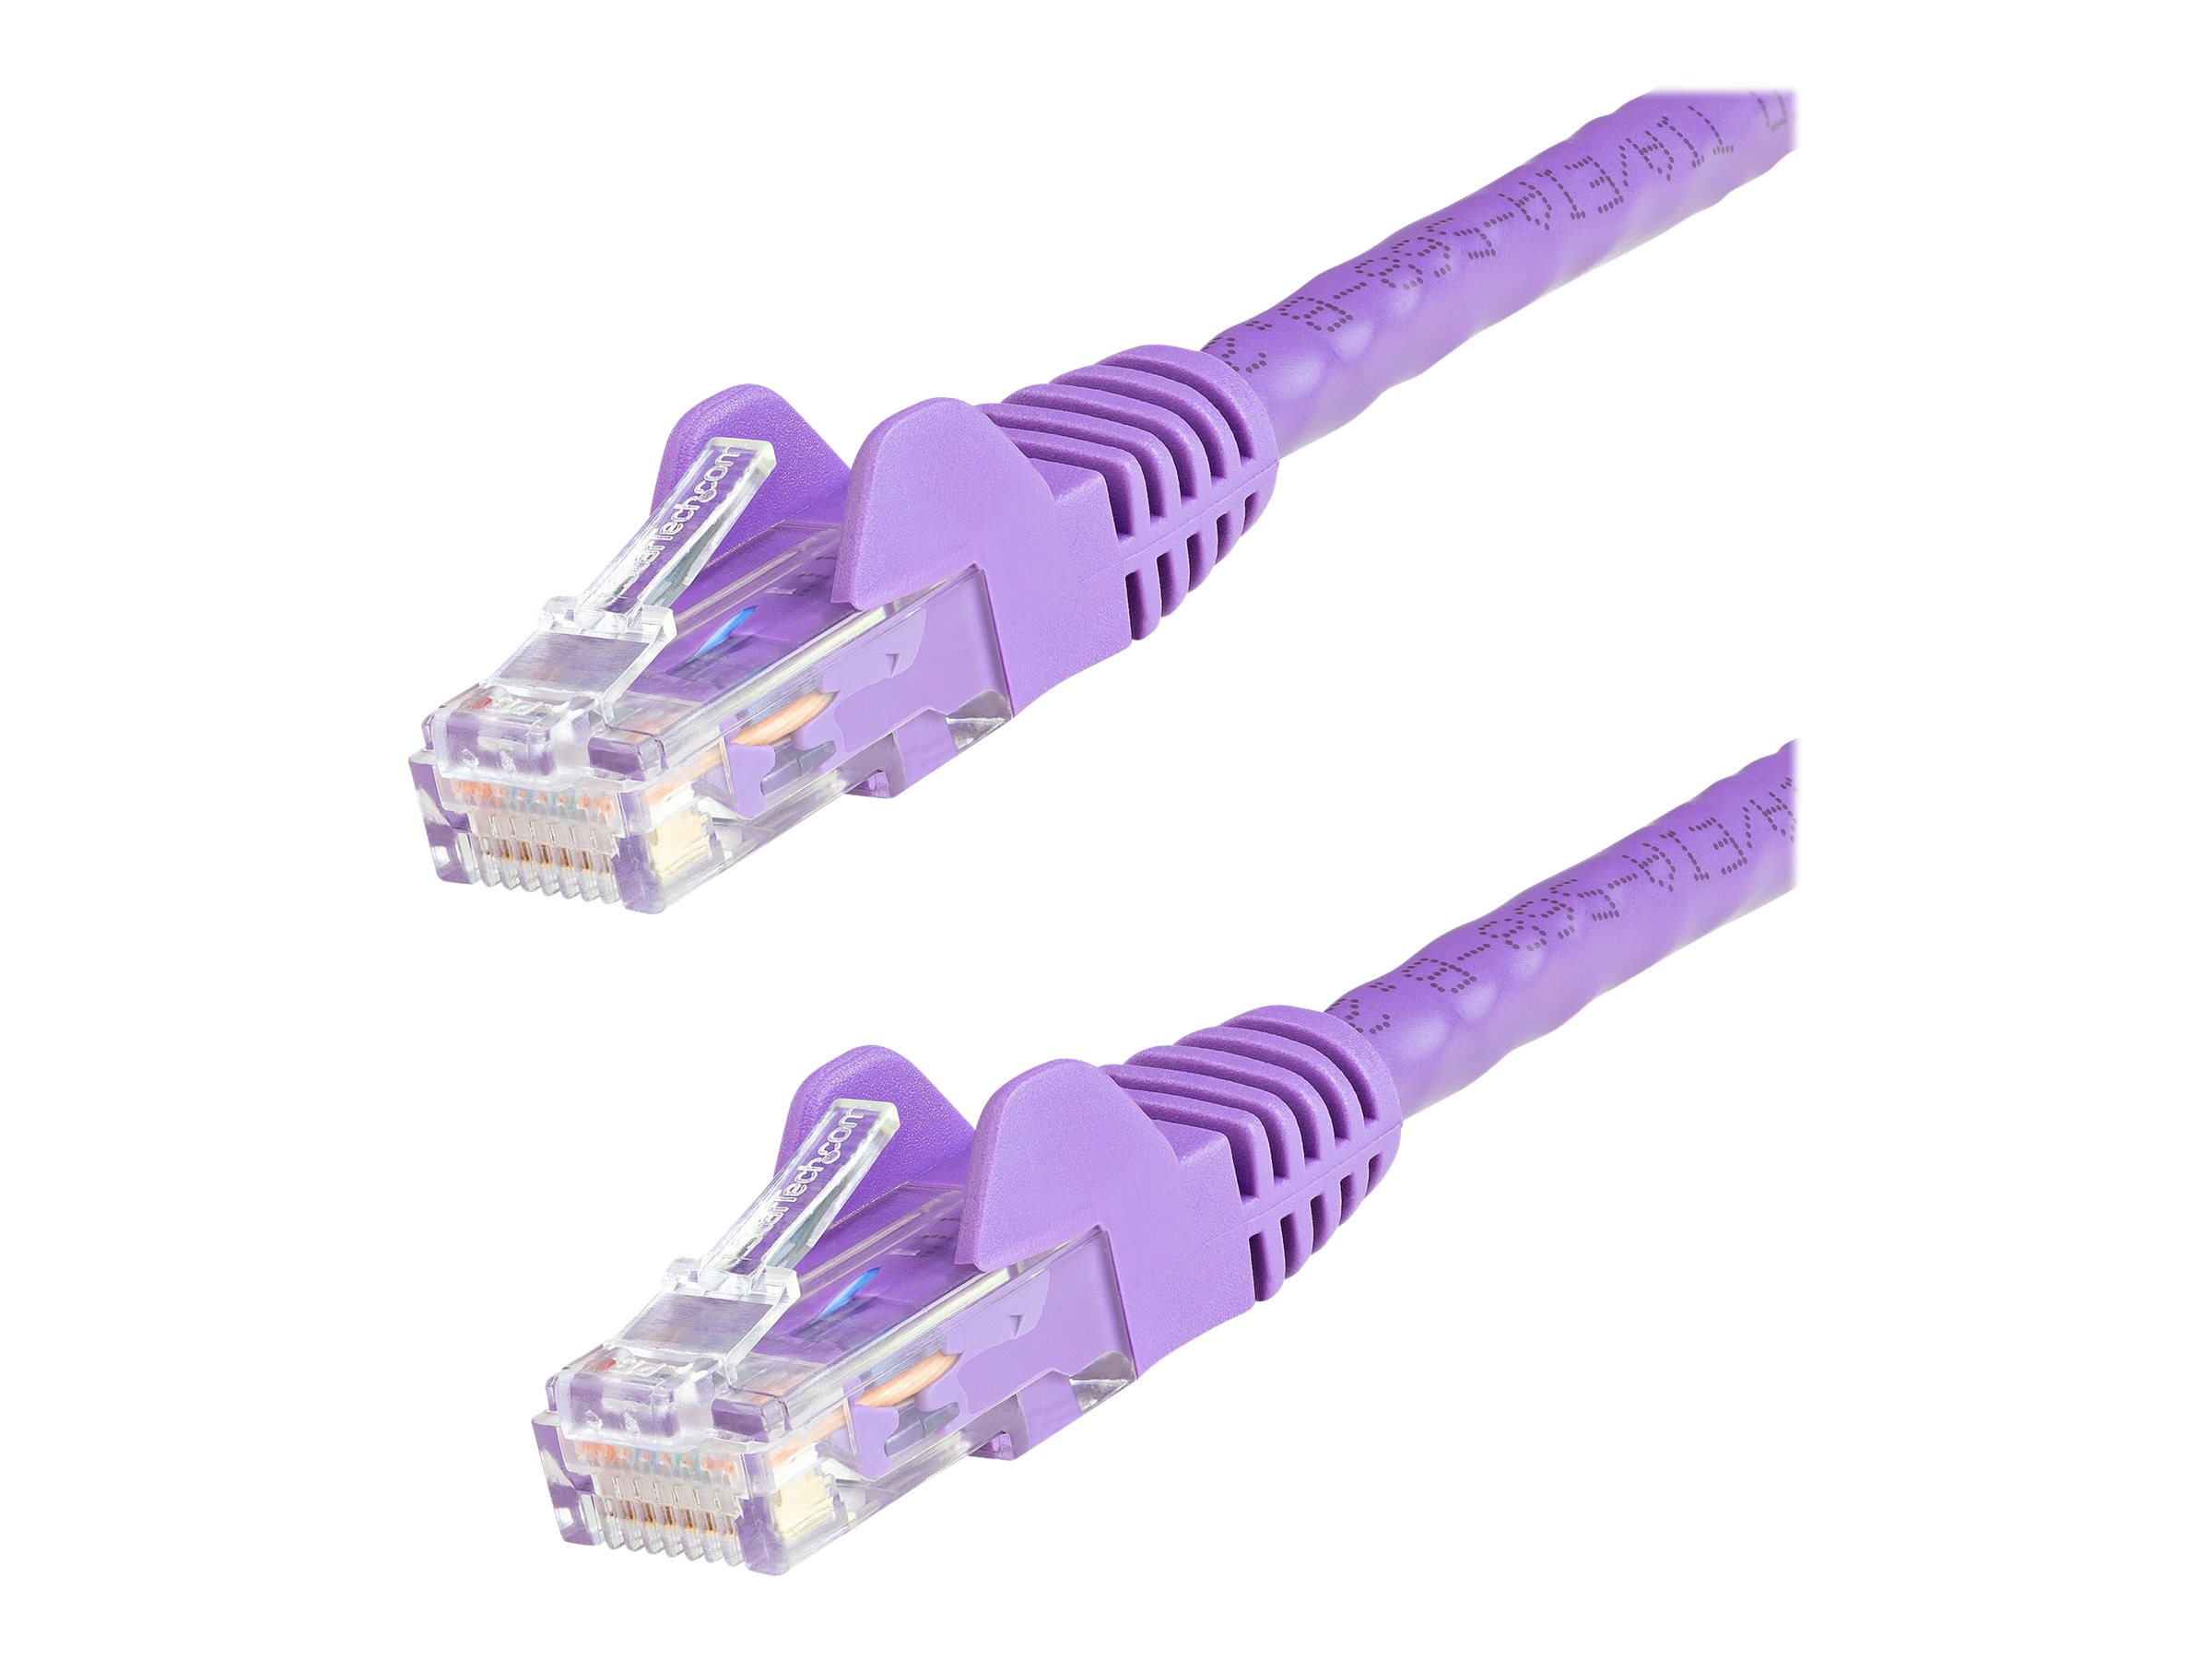 StarTech.com 25ft CAT6 Cable, 10 Gigabit Snagless RJ45 650MHz 100W PoE Cat 6 Patch Cord, 10GbE UTP CAT6 Network Cable, Purple CAT6 Ethernet Cable, Fluke Tested/Wiring is UL Certified/TIA